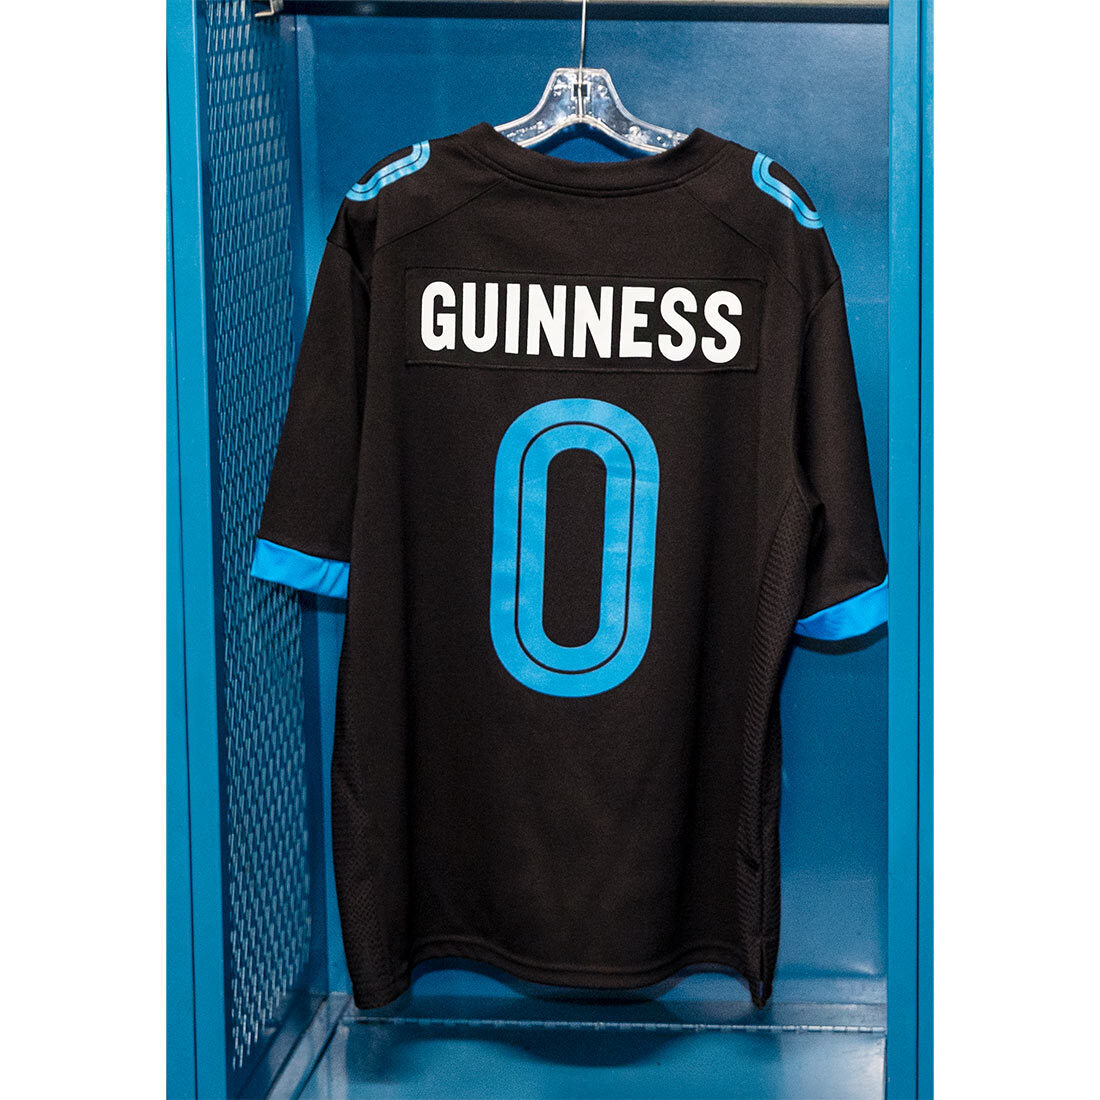 A Guinness 0 Football Jersey - Black with the number 0 hanging in a locker. (By Guinness Webstore US)